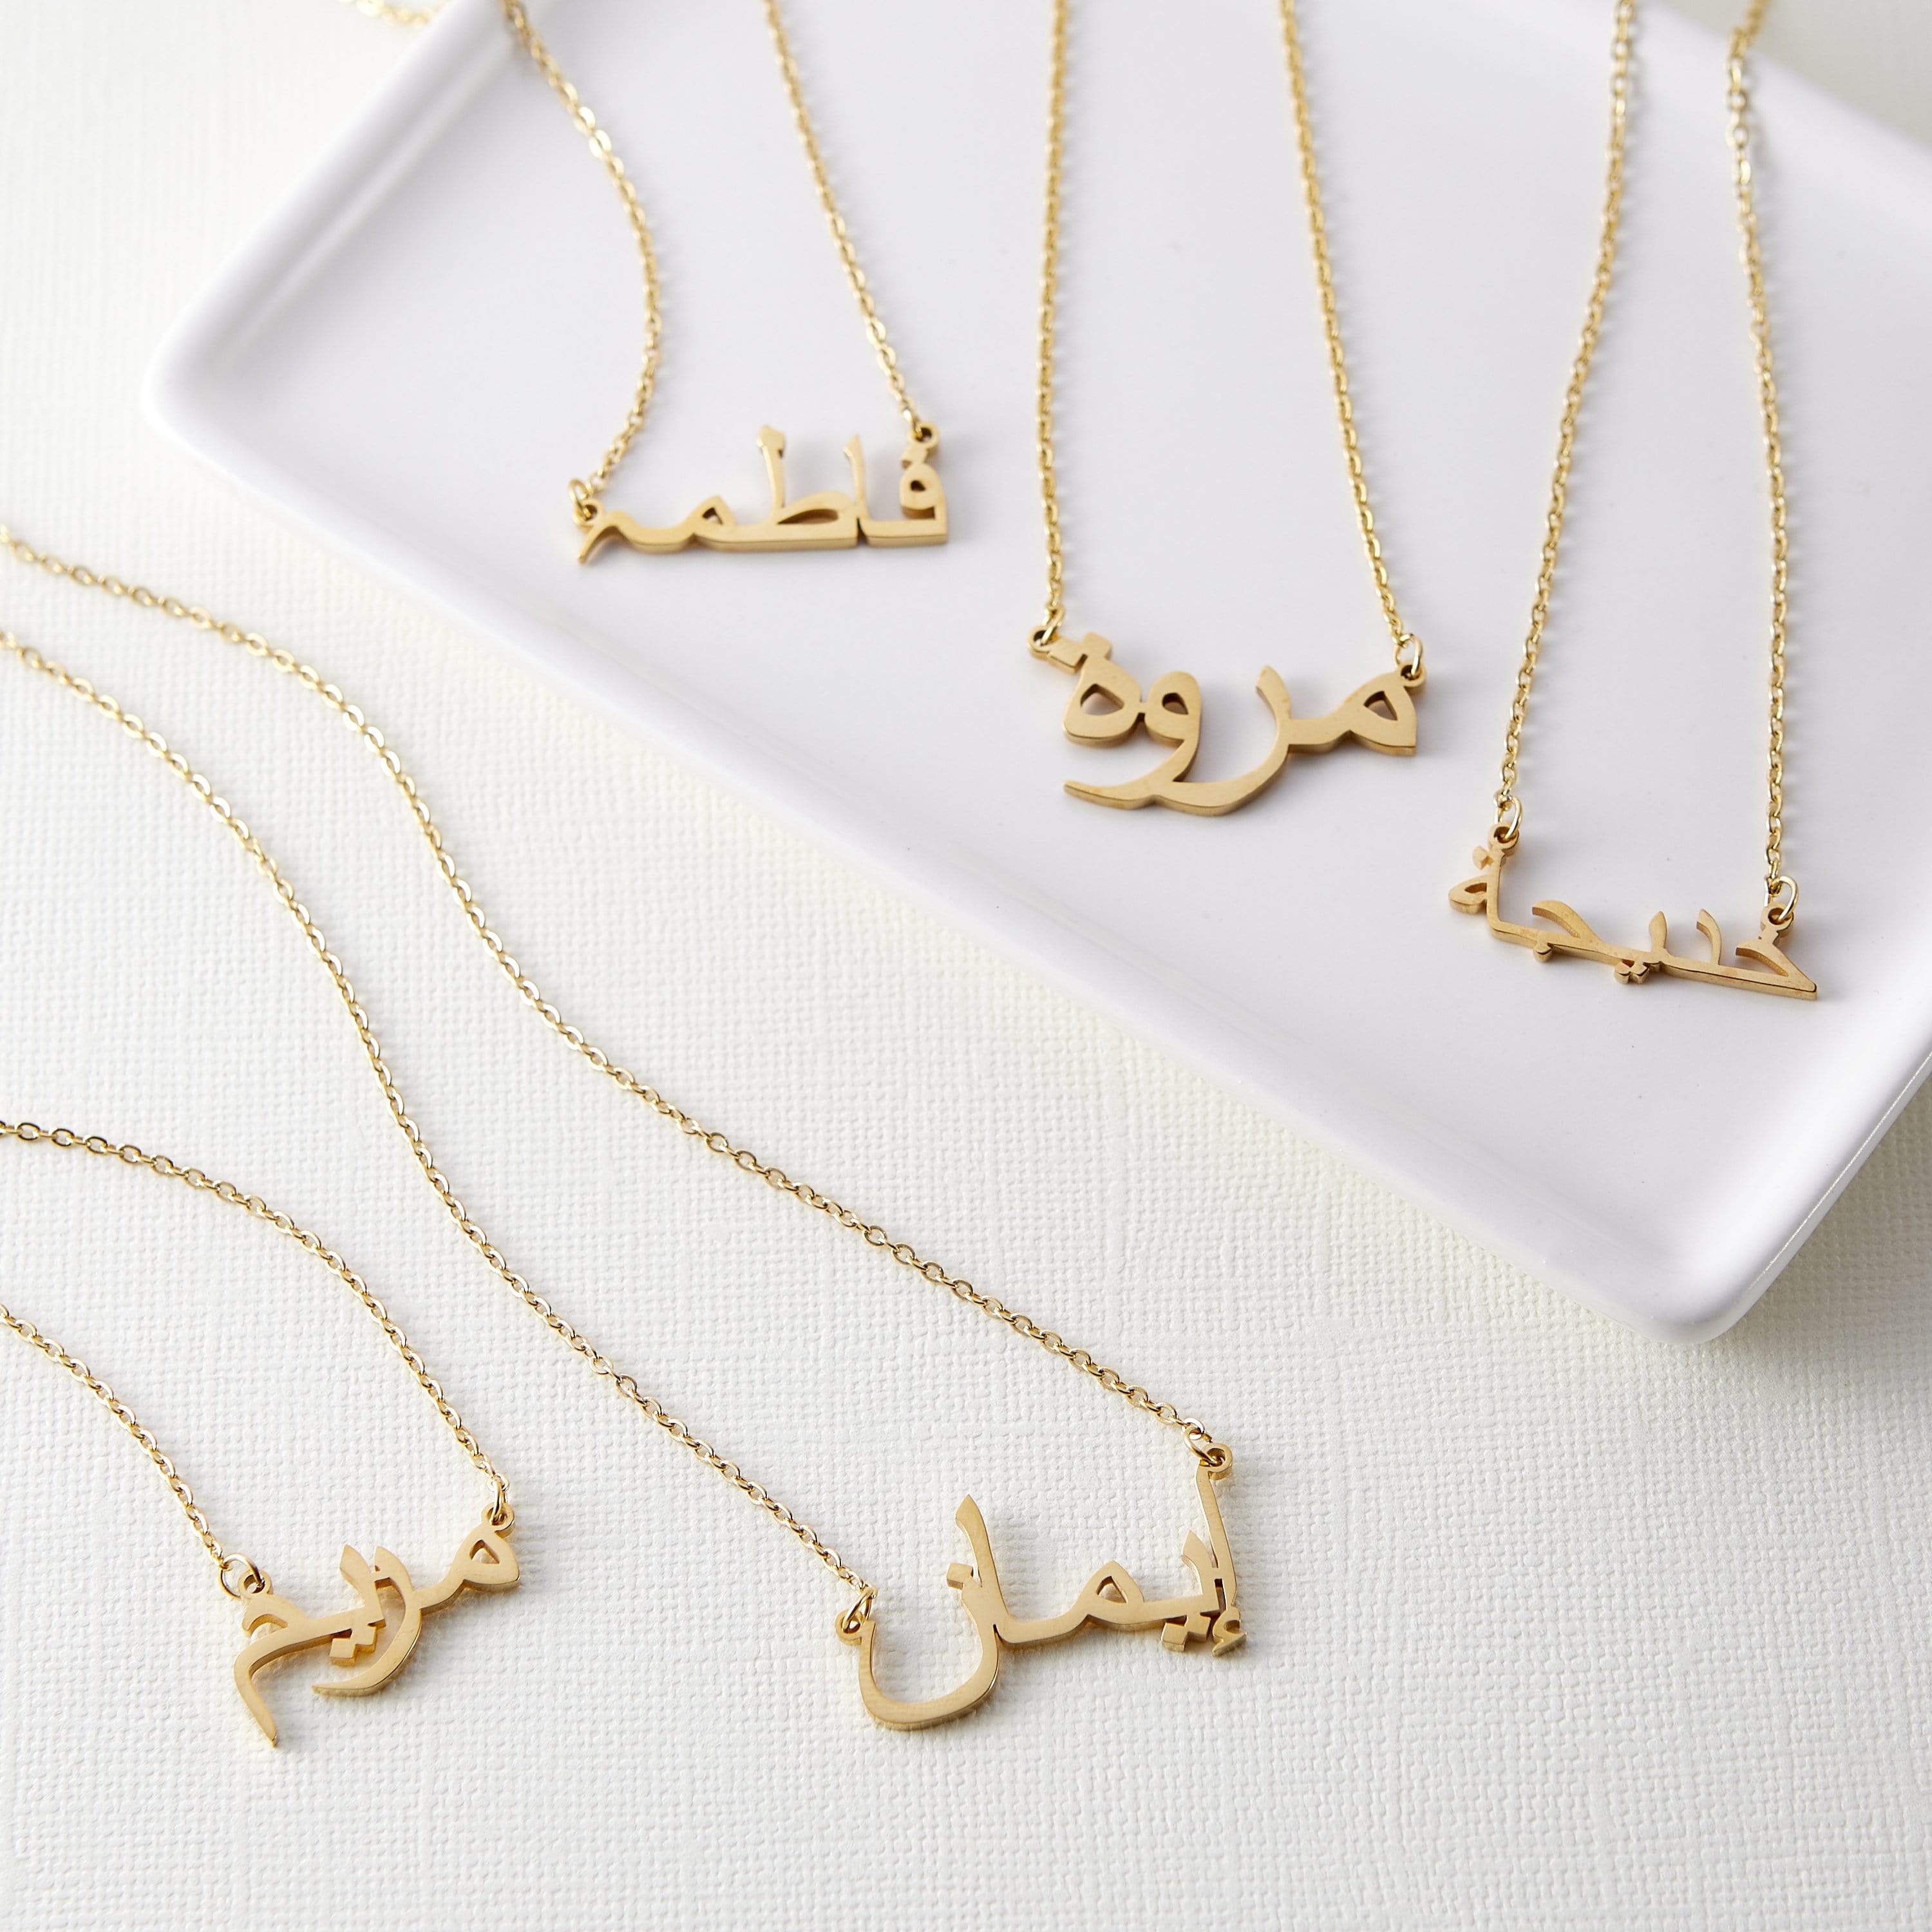 Ready Name Necklace | Letters A-M - Nominal